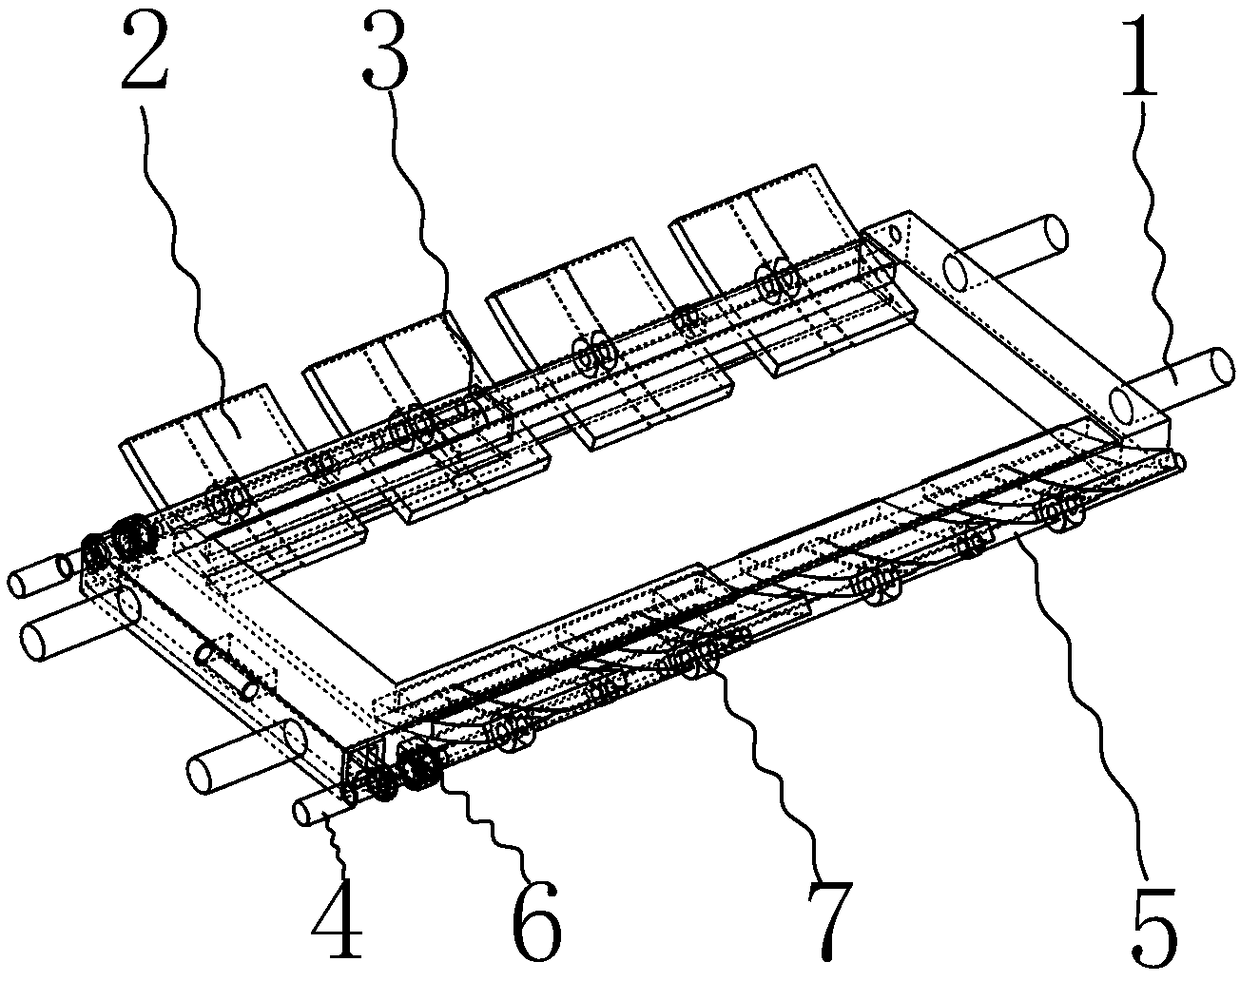 Shovel-type stretcher with adjustable length for medical field